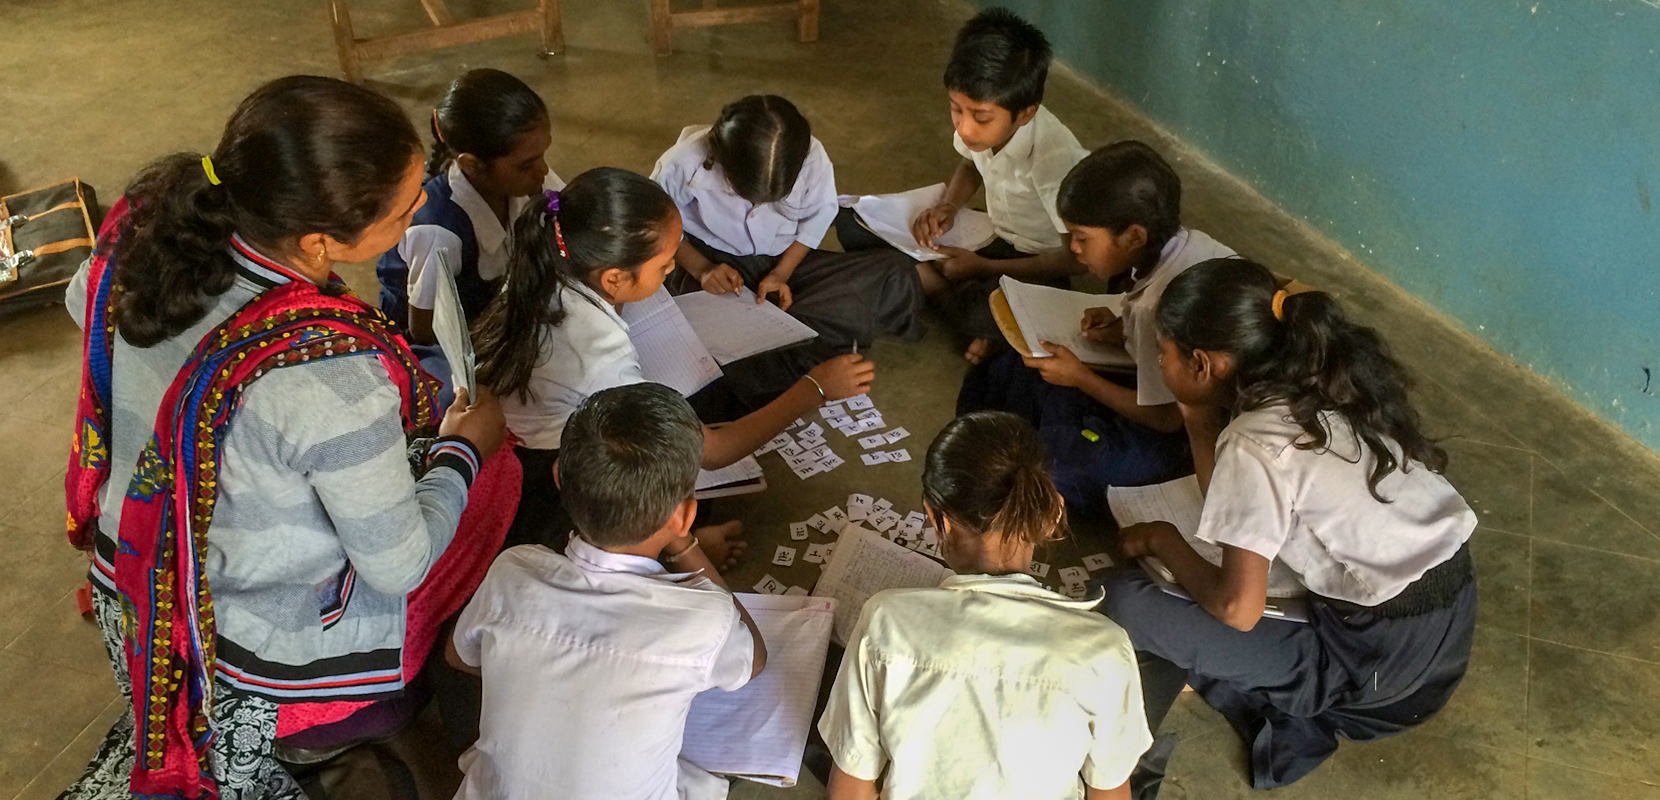 Teaching at the Right Level to improve learning | The Abdul Latif Jameel Poverty Action Lab